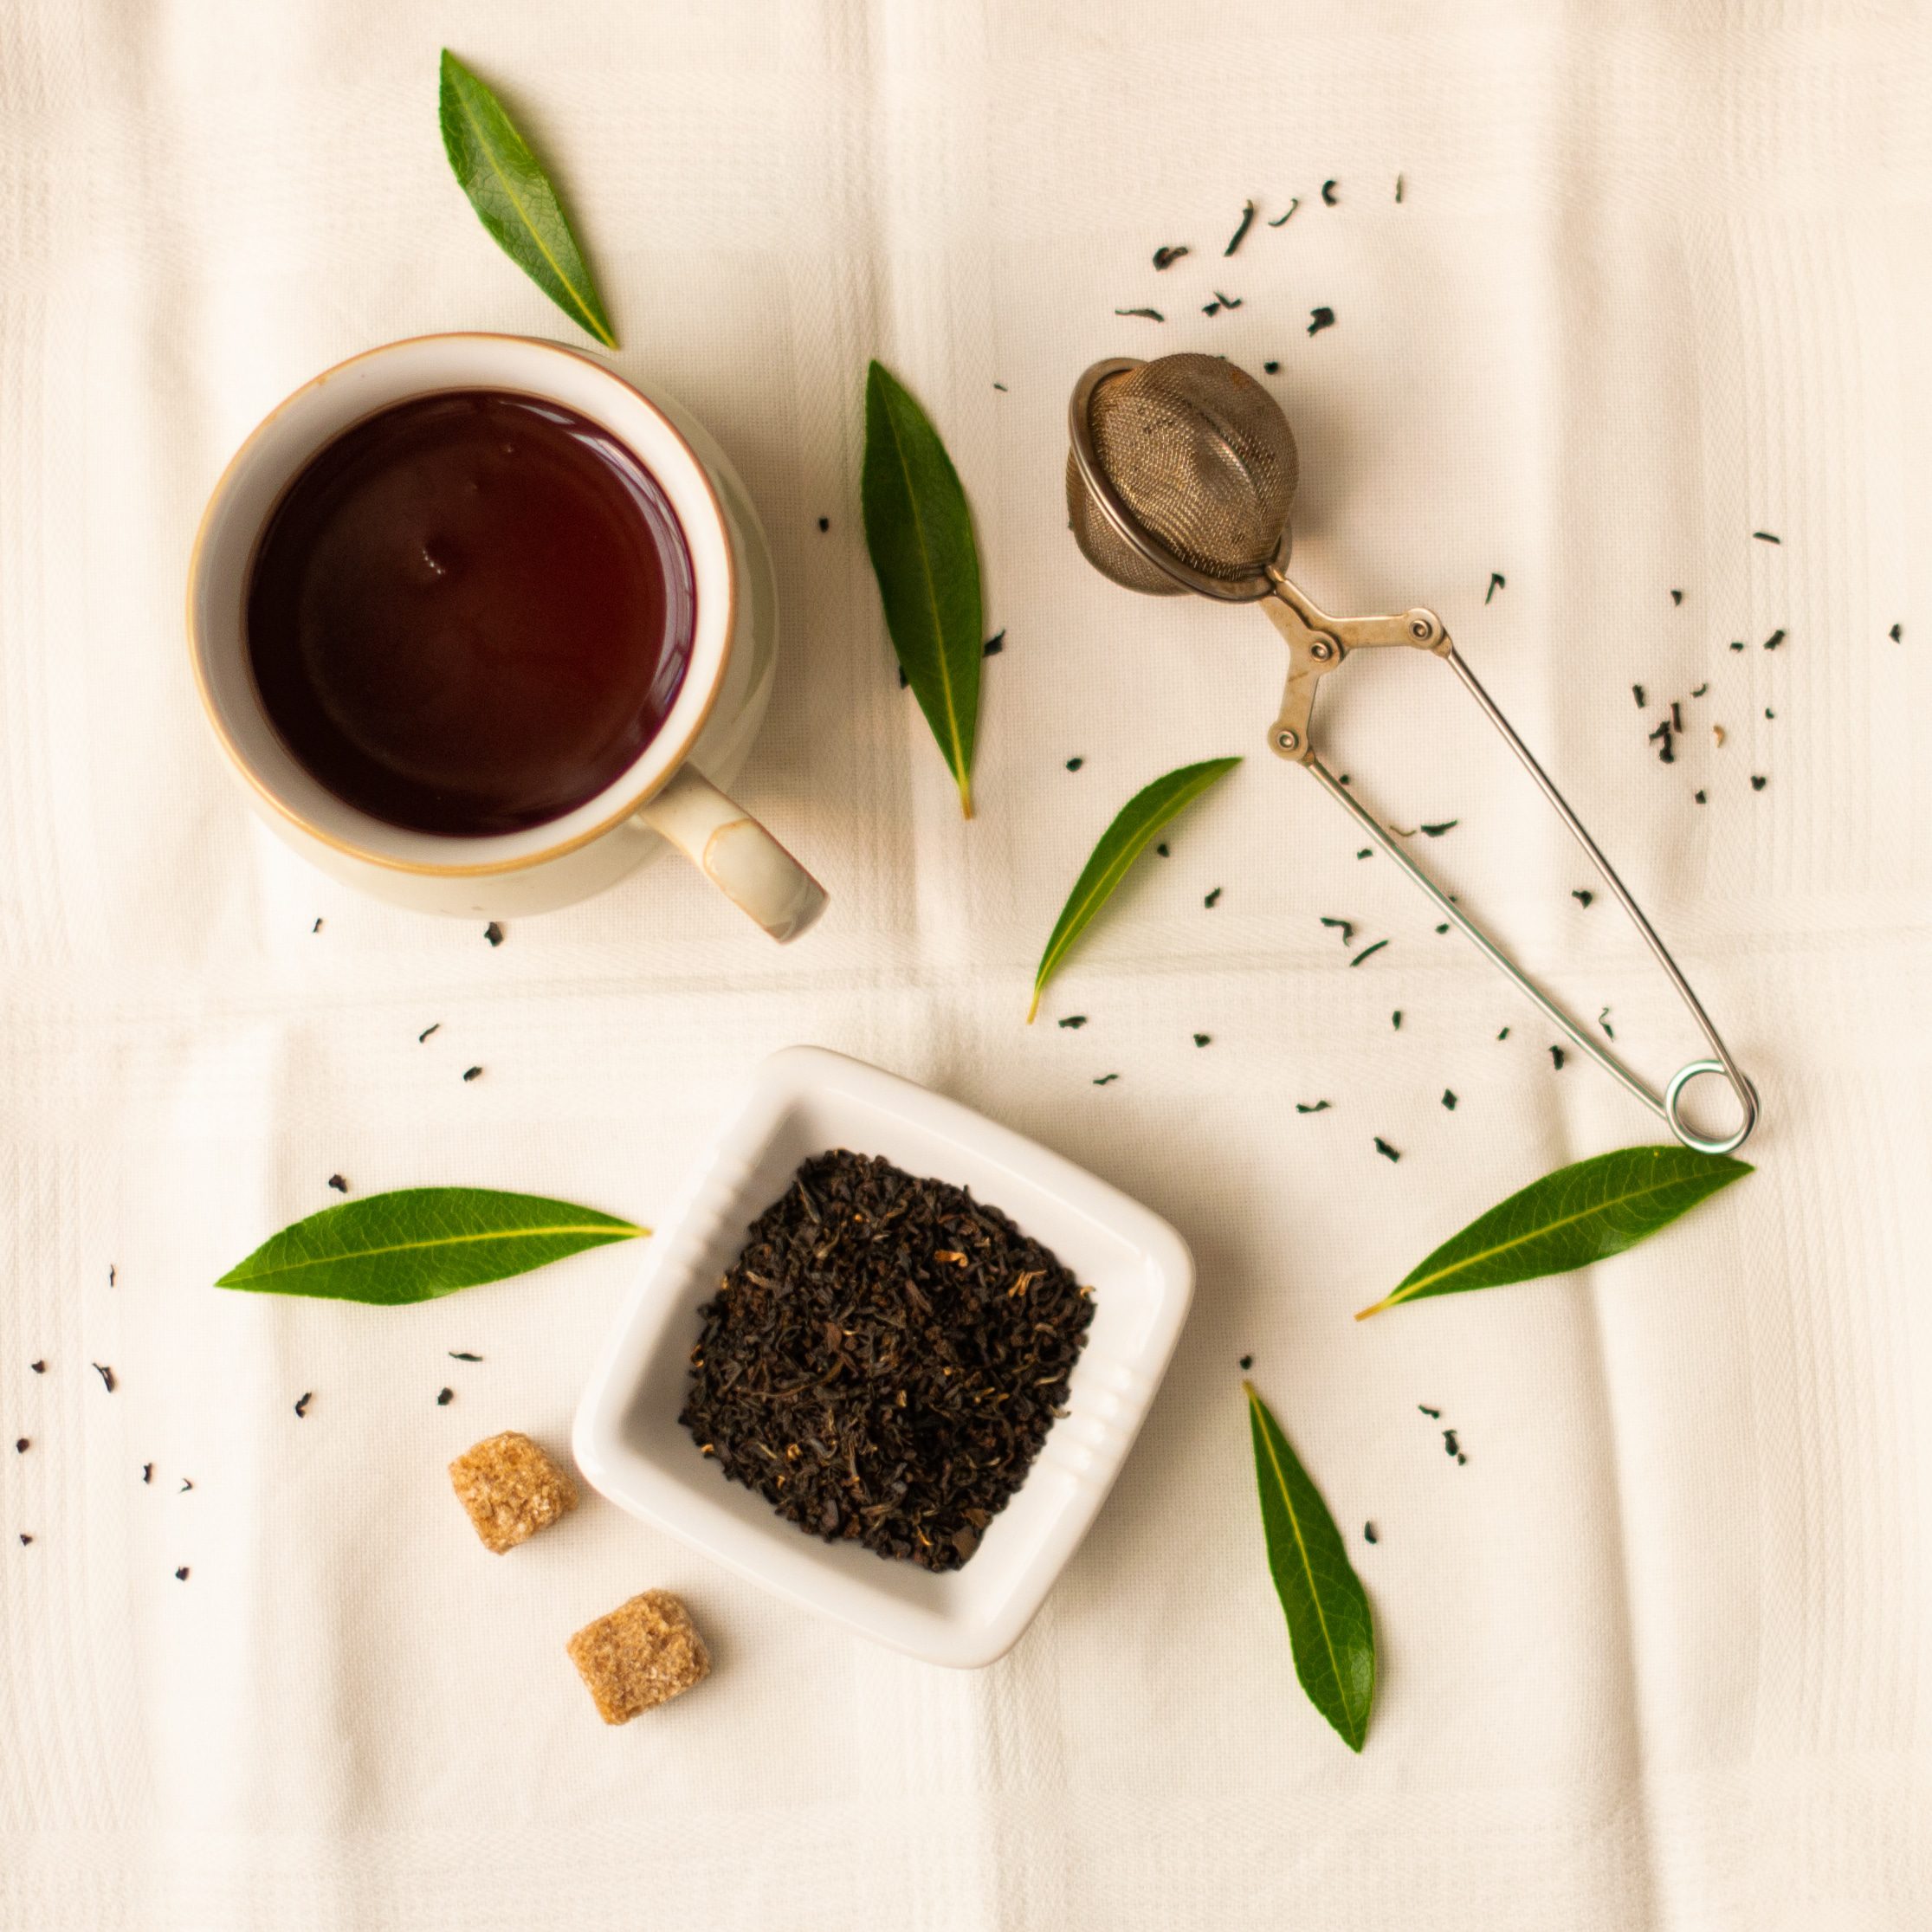 Cup of breakfast tea with metal infuser, loose leaves and green leaves 